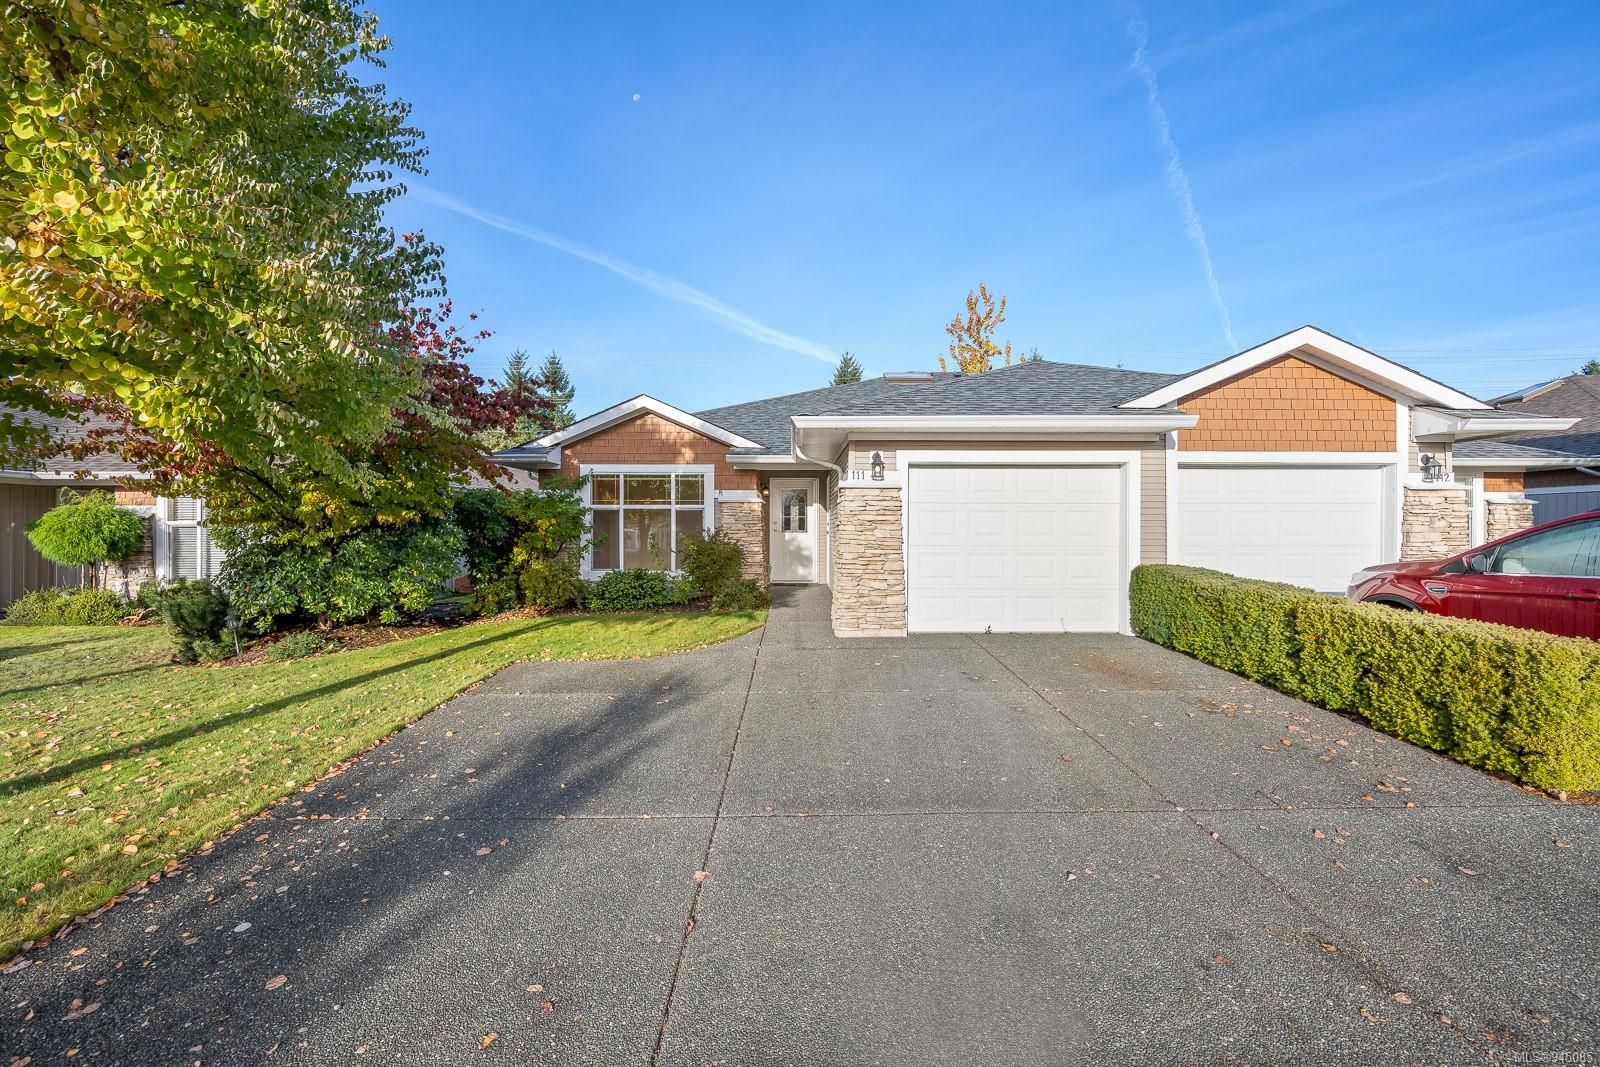 I have sold a property at 111 1919 St. Andrews Pl in Courtenay
